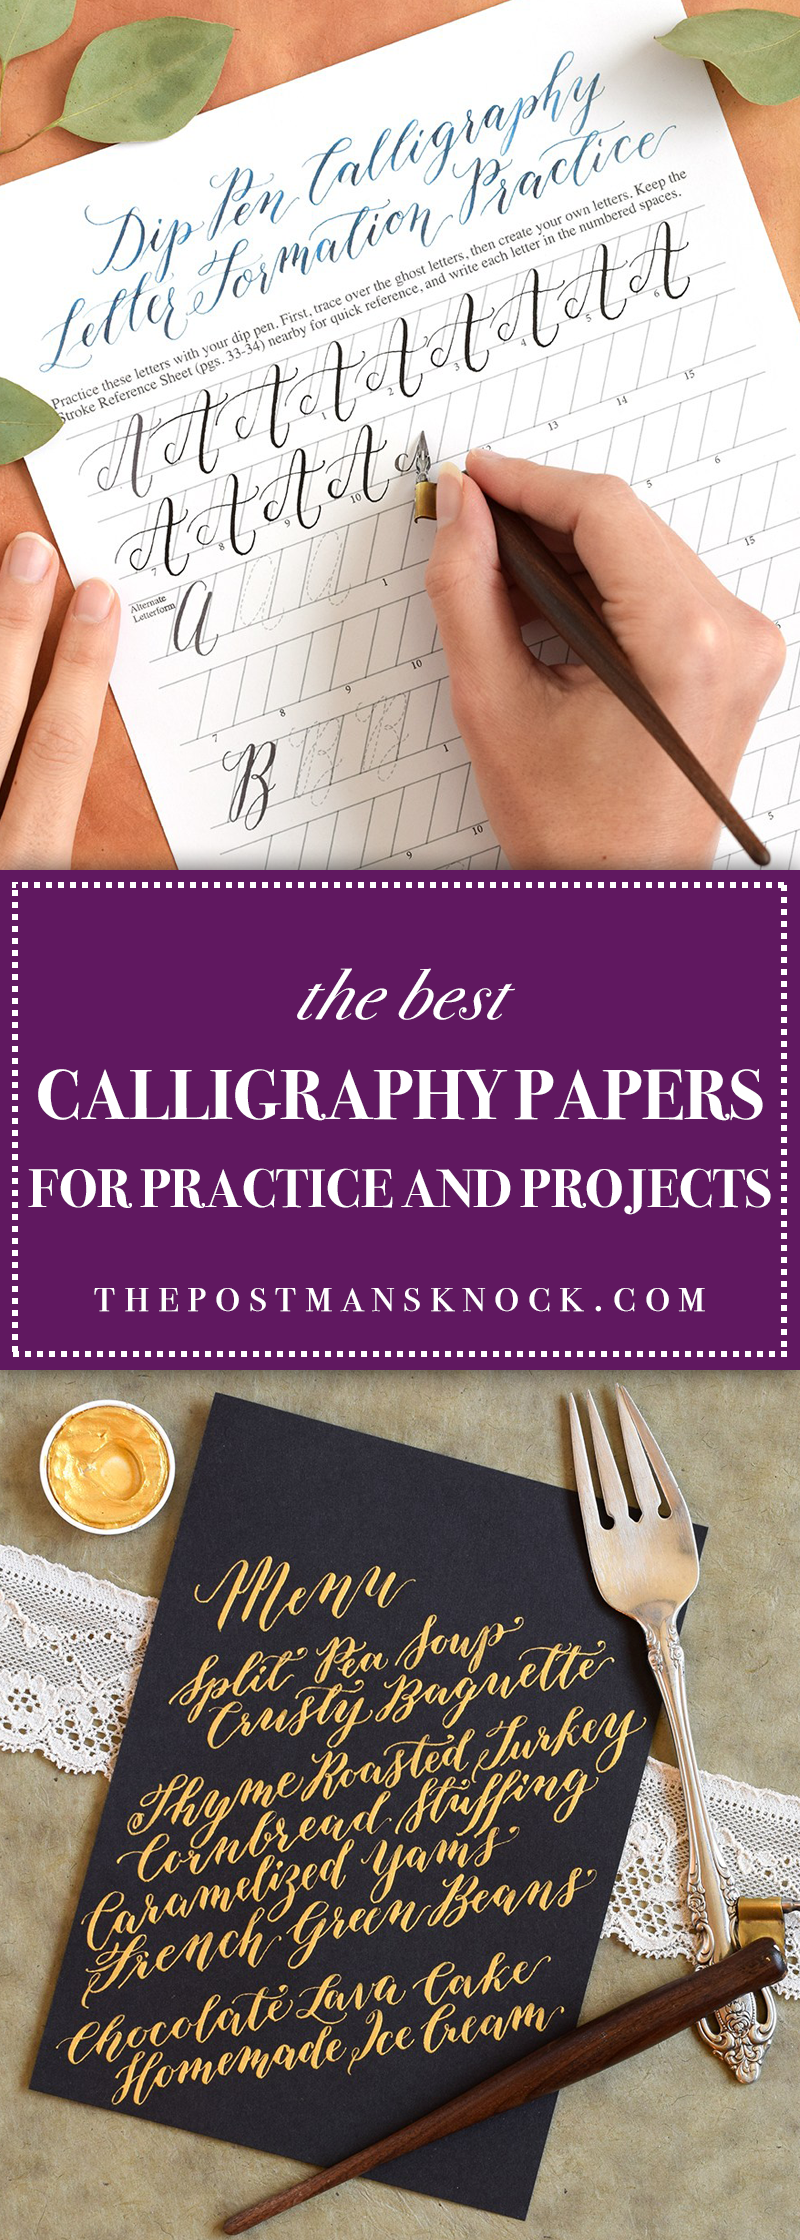 The Best Calligraphy Papers for Practice and Projects | The Postman's Knock